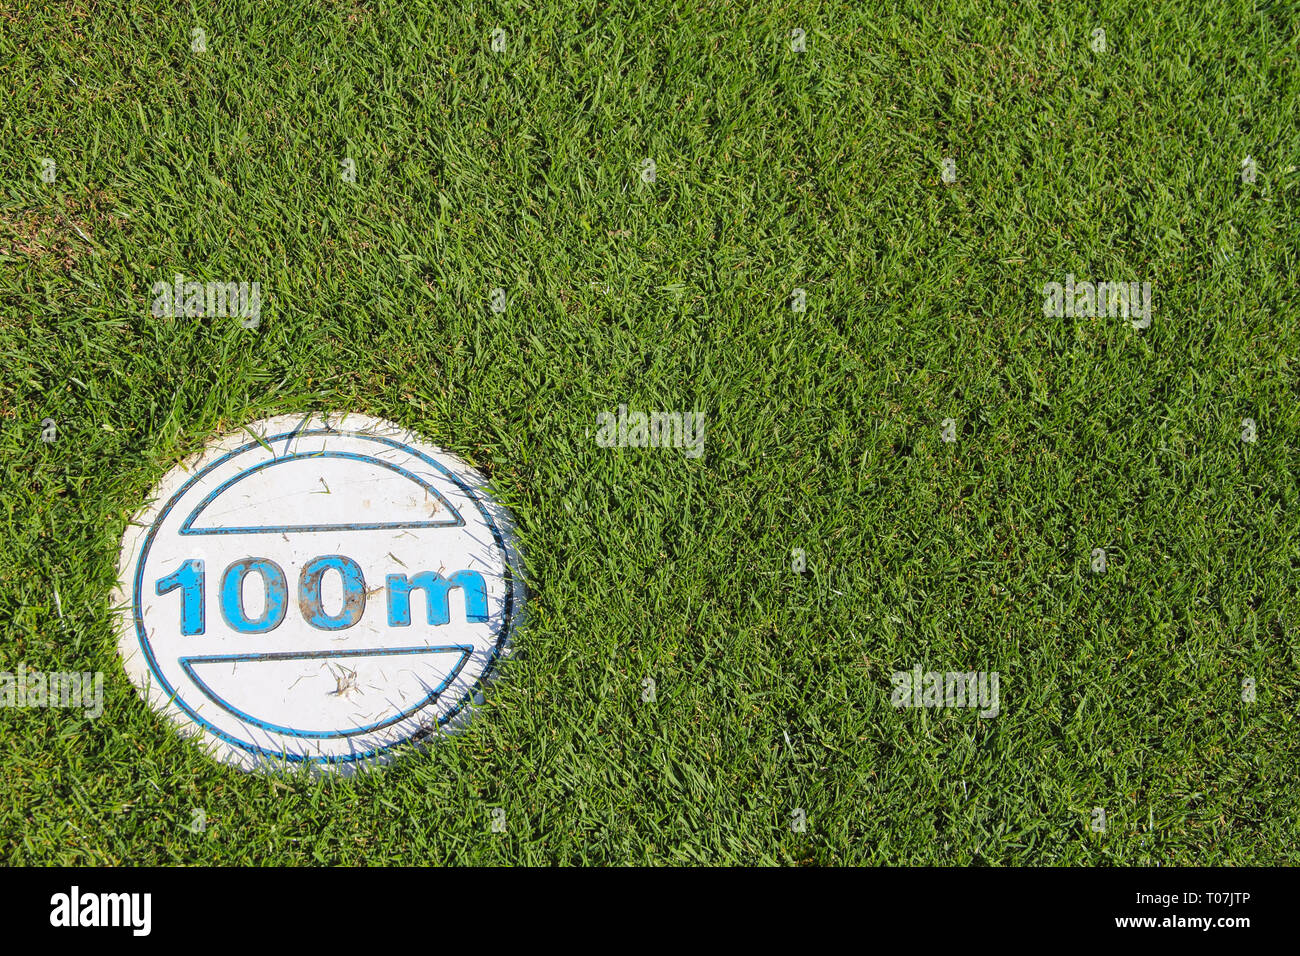 Golf Course green grass textured background with 100 m mark Stock Photo